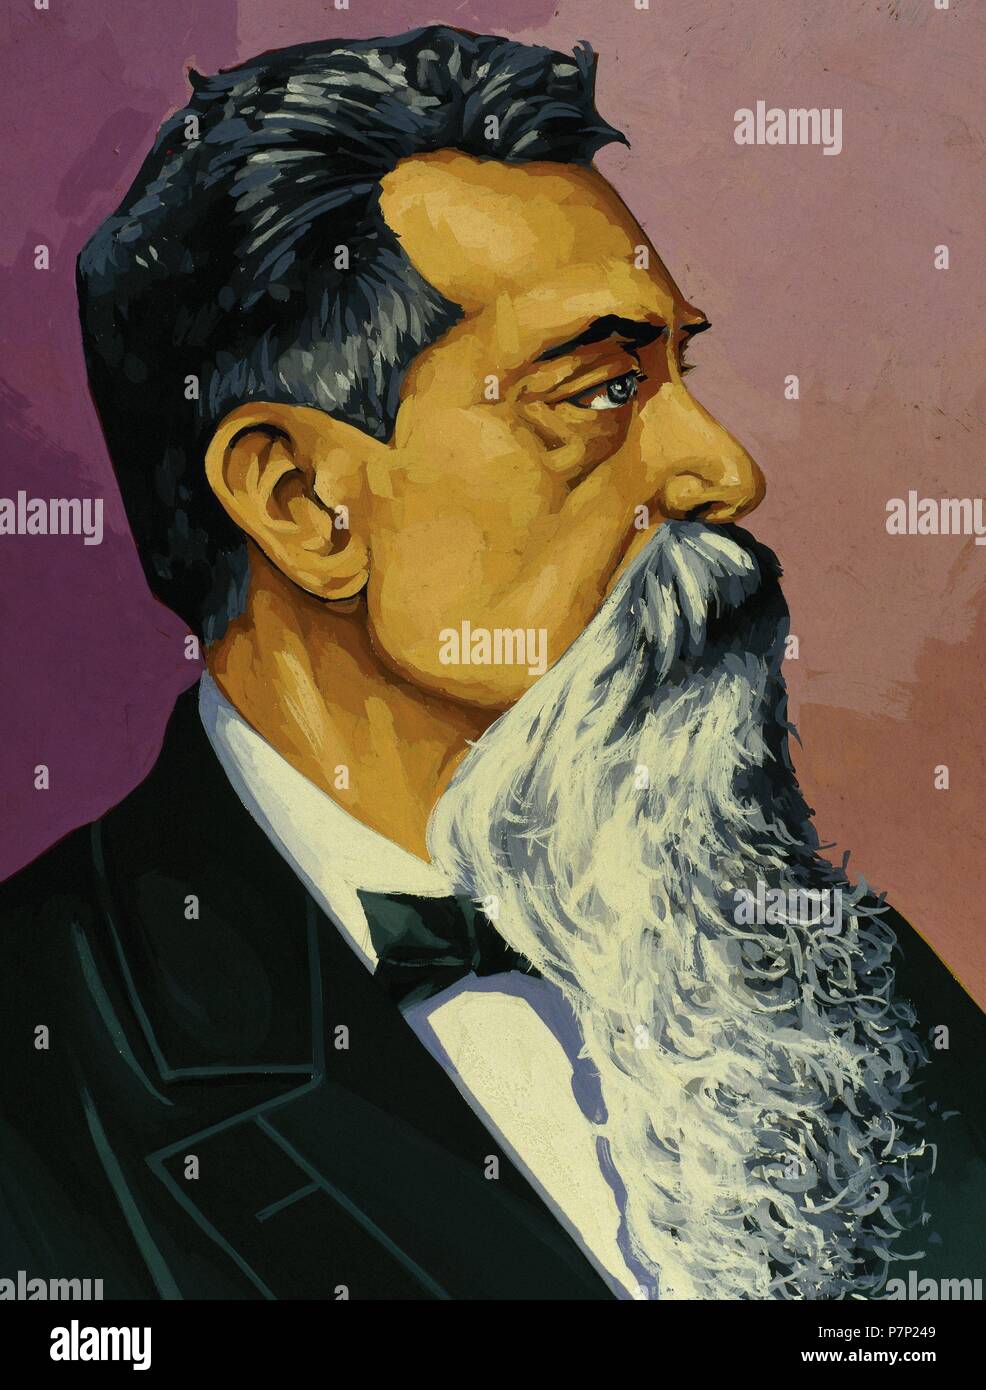 Leandro Nicephorus Alem (1842-1896). Argentinian politician. Head of the Revolution of 1890 that demolished the president Jua rez Celmar. He founded the Radical Civic Union party, which opposed the regime and unleashed the revolution of 1893, which failed. Portrait. Watercolor. Stock Photo